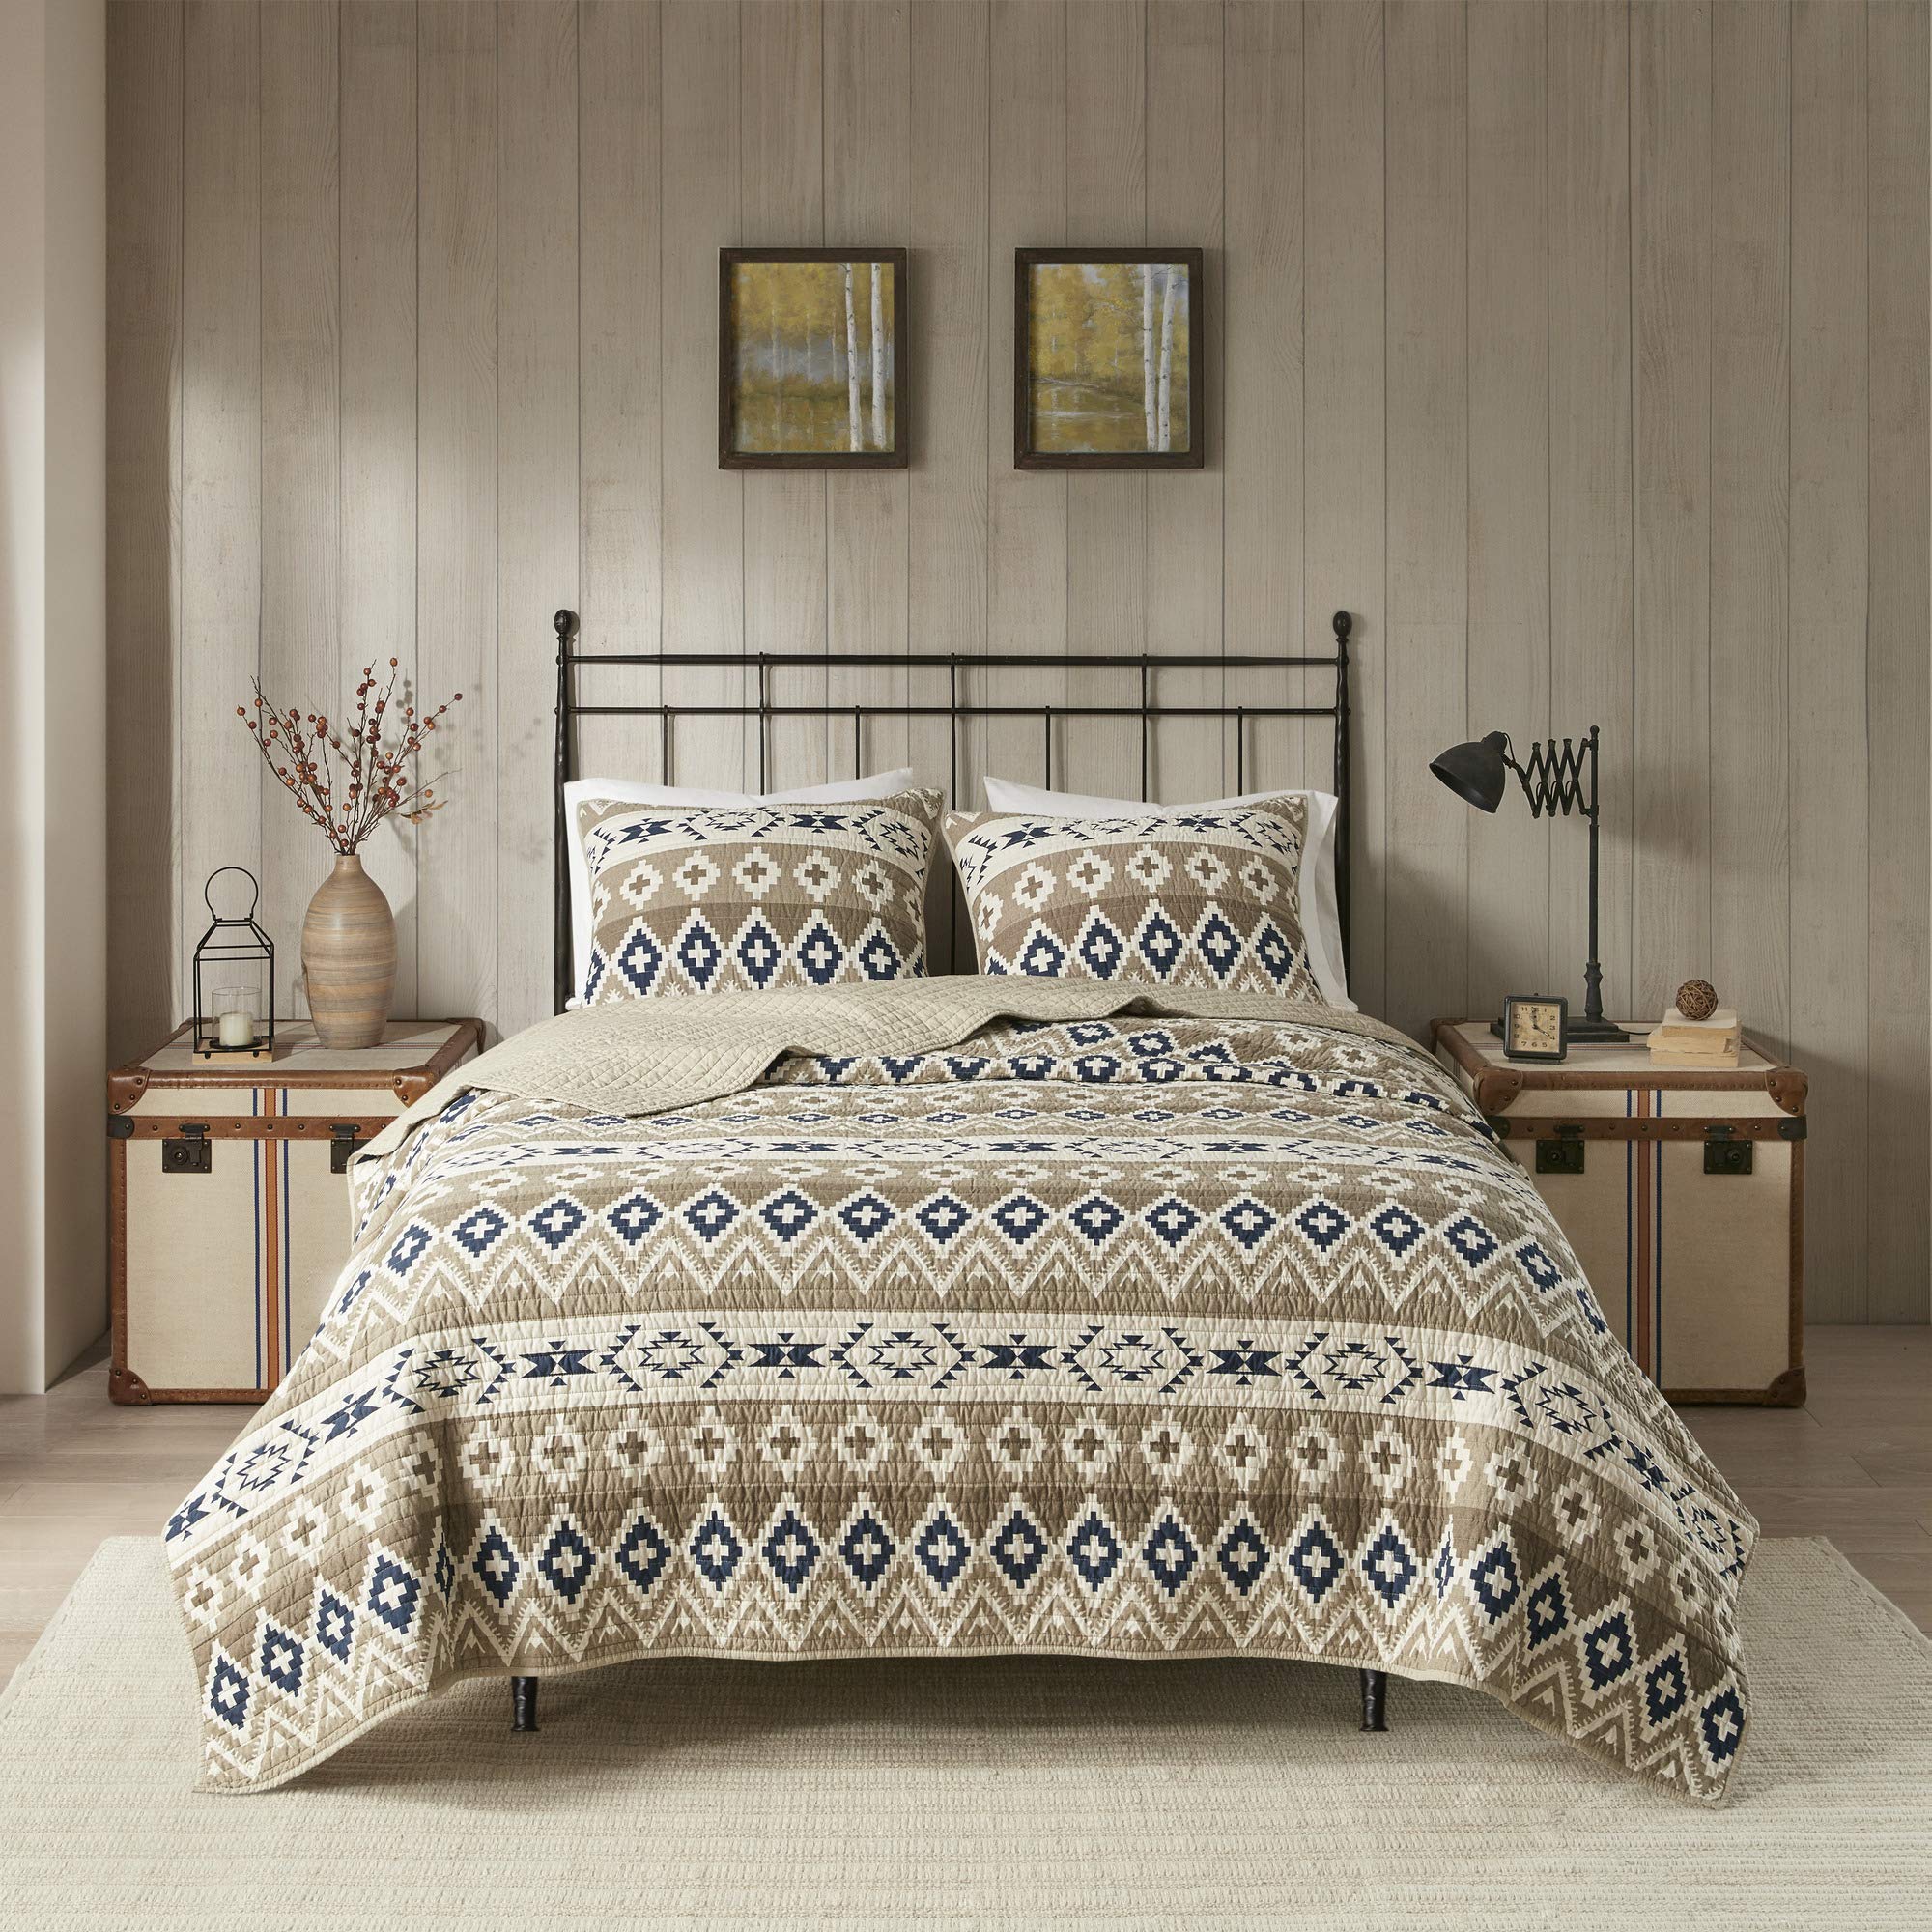 Woolrich Reversible Quilt Cabin Lifestyle Design - All Season, Breathable Coverlet Bedspread Bedding Set, Matching Shams, Oversized Full/Queen, Montana Tribal Tan 3 Piece